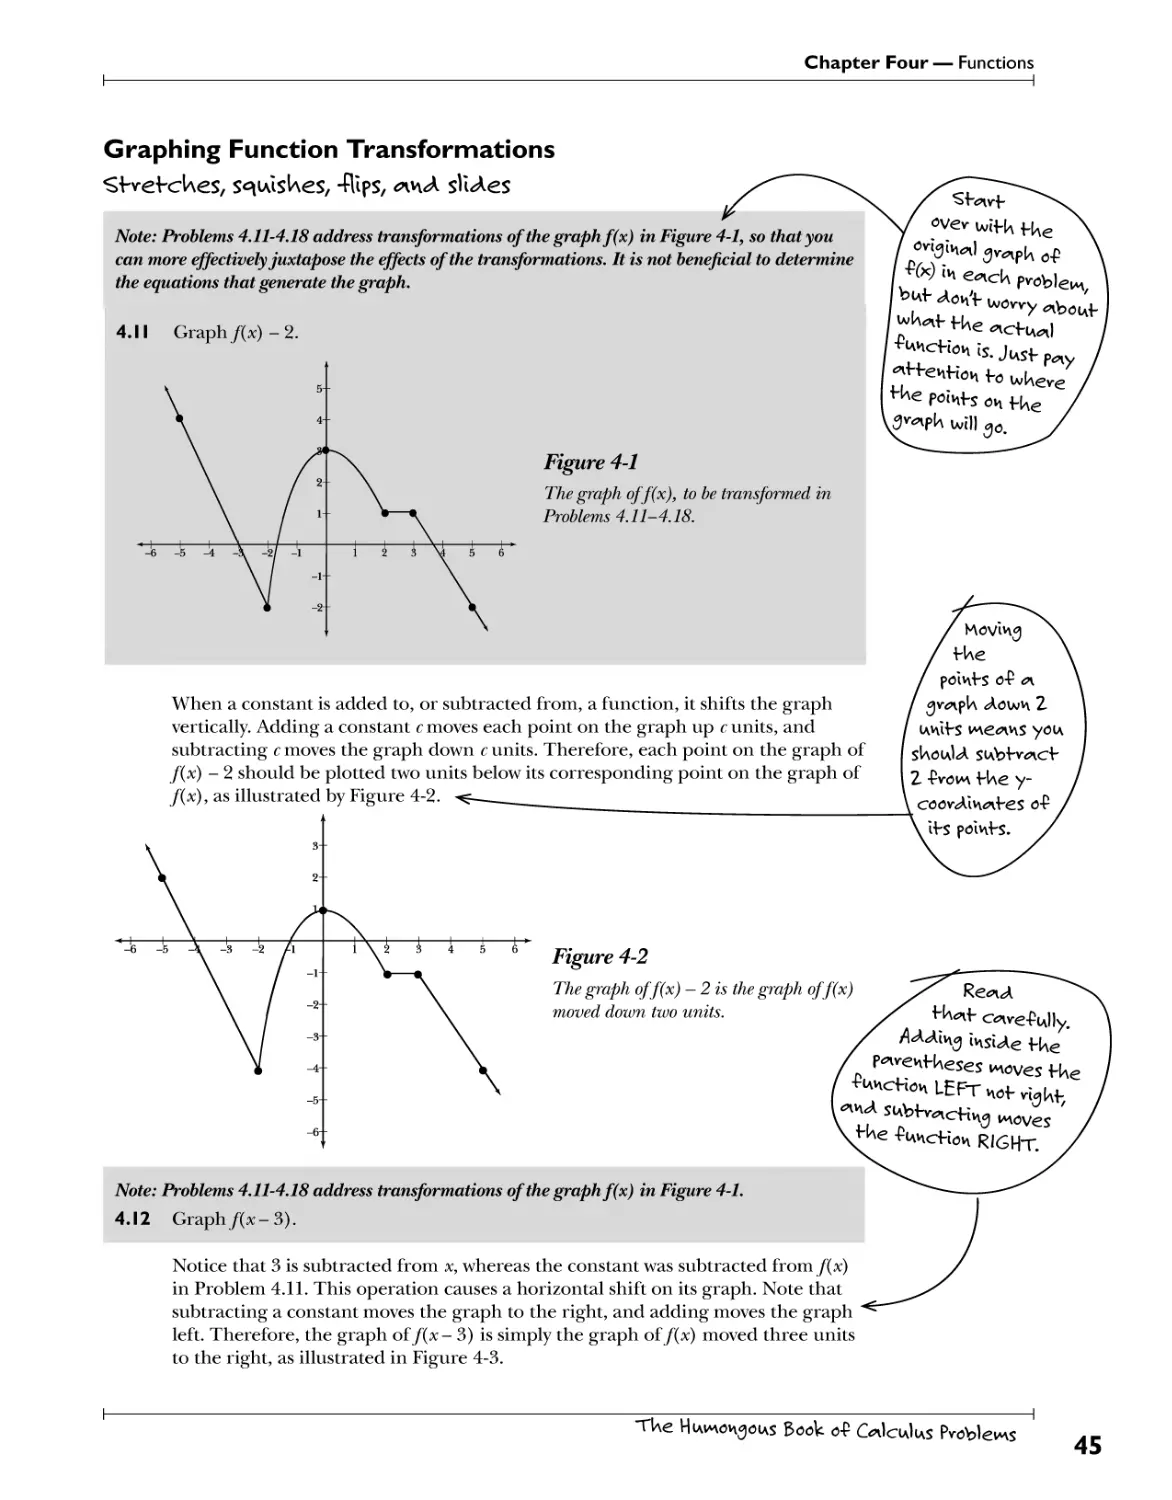 Graphing Function Transformations 45